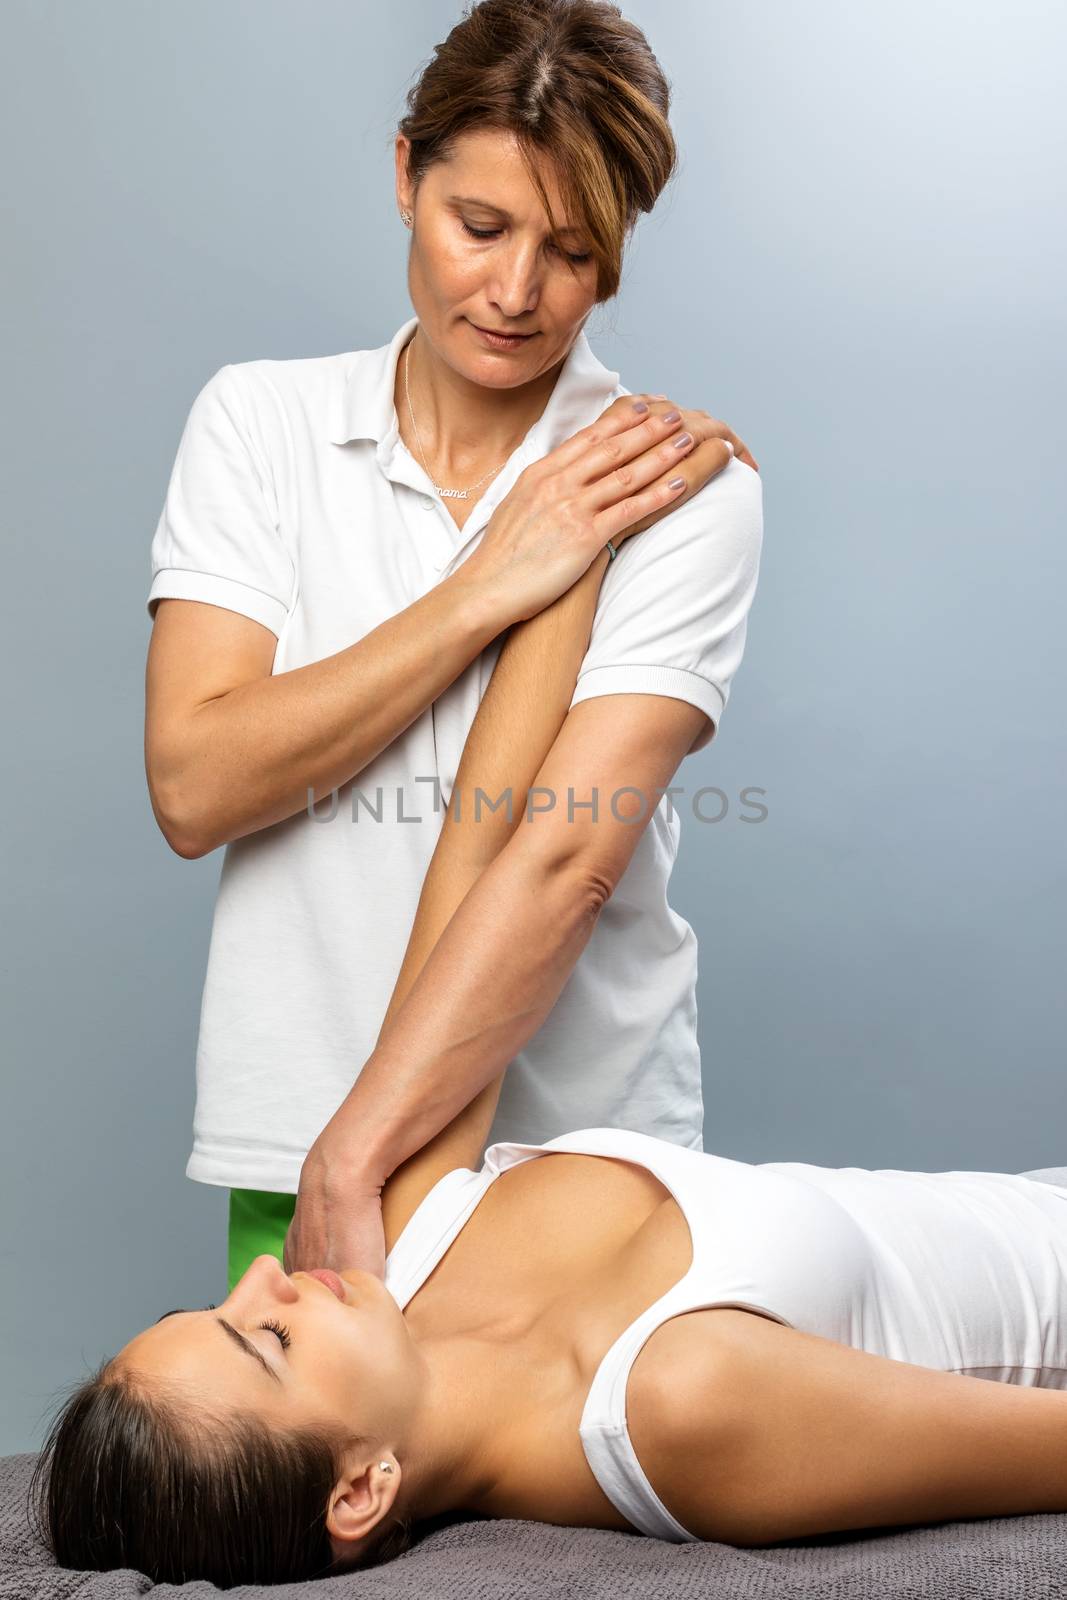 Female osteopath manipulating arm on patient. by karelnoppe